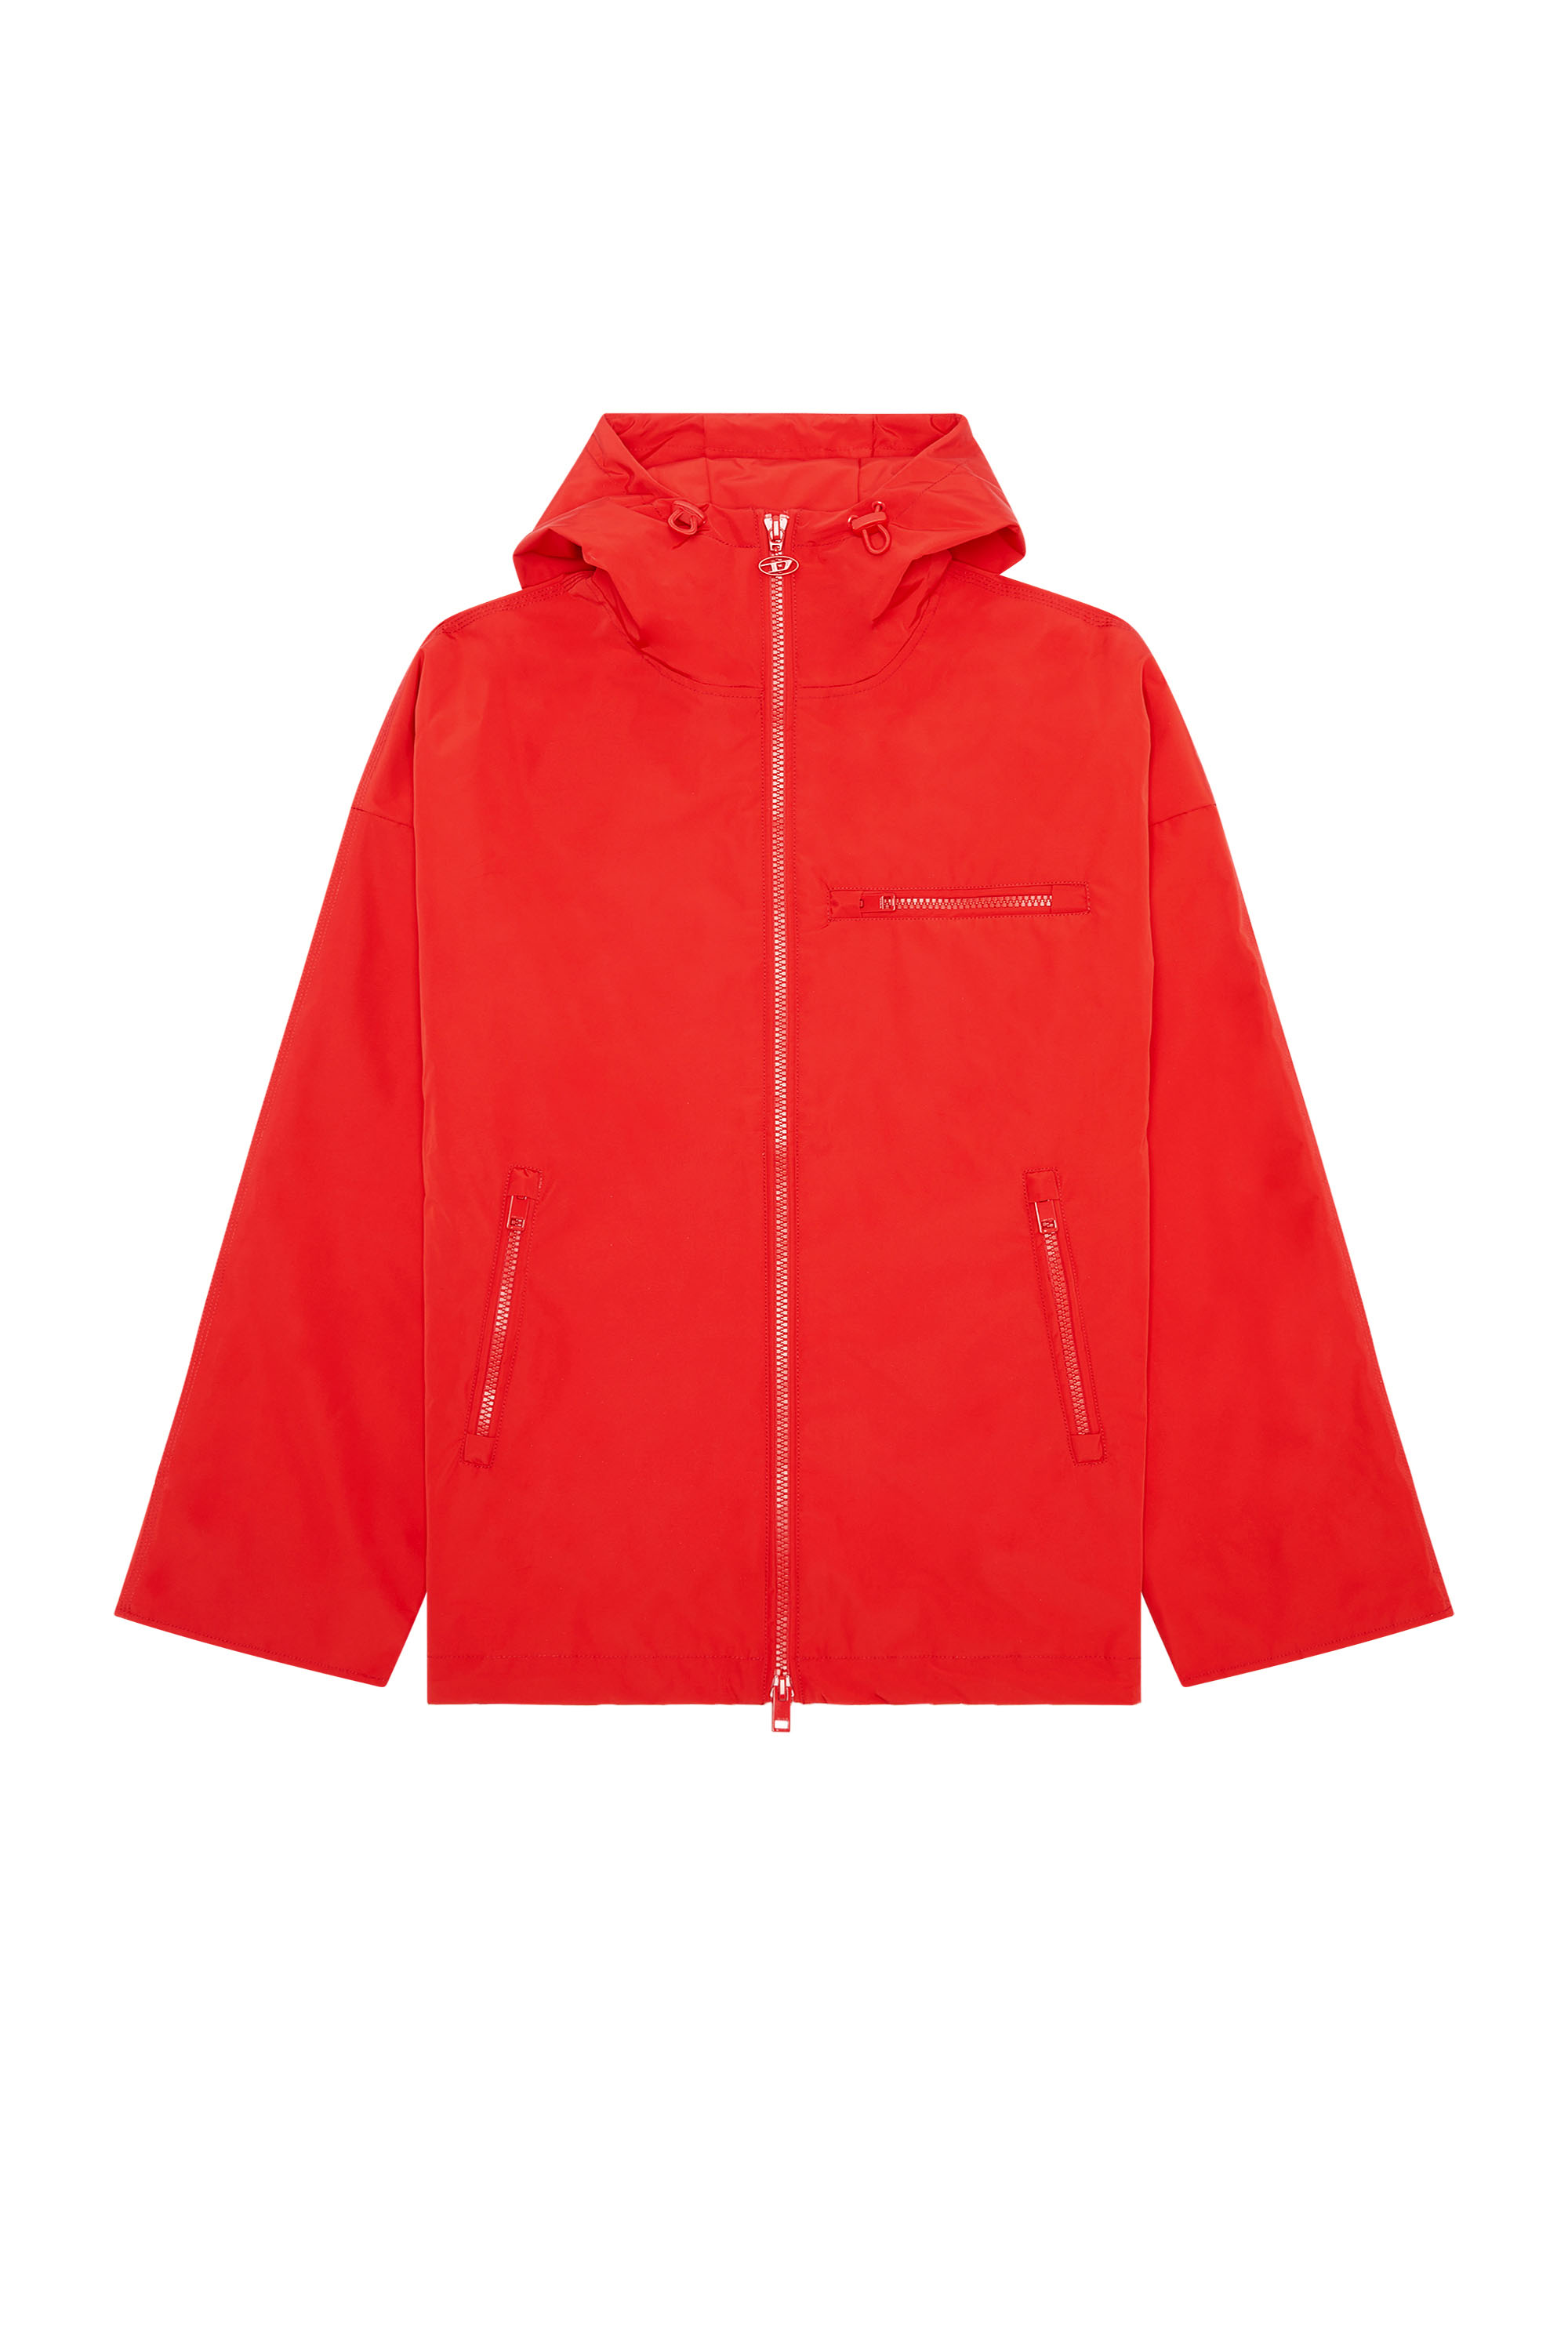 Diesel Hooded Jacket With Piped Logo In Red